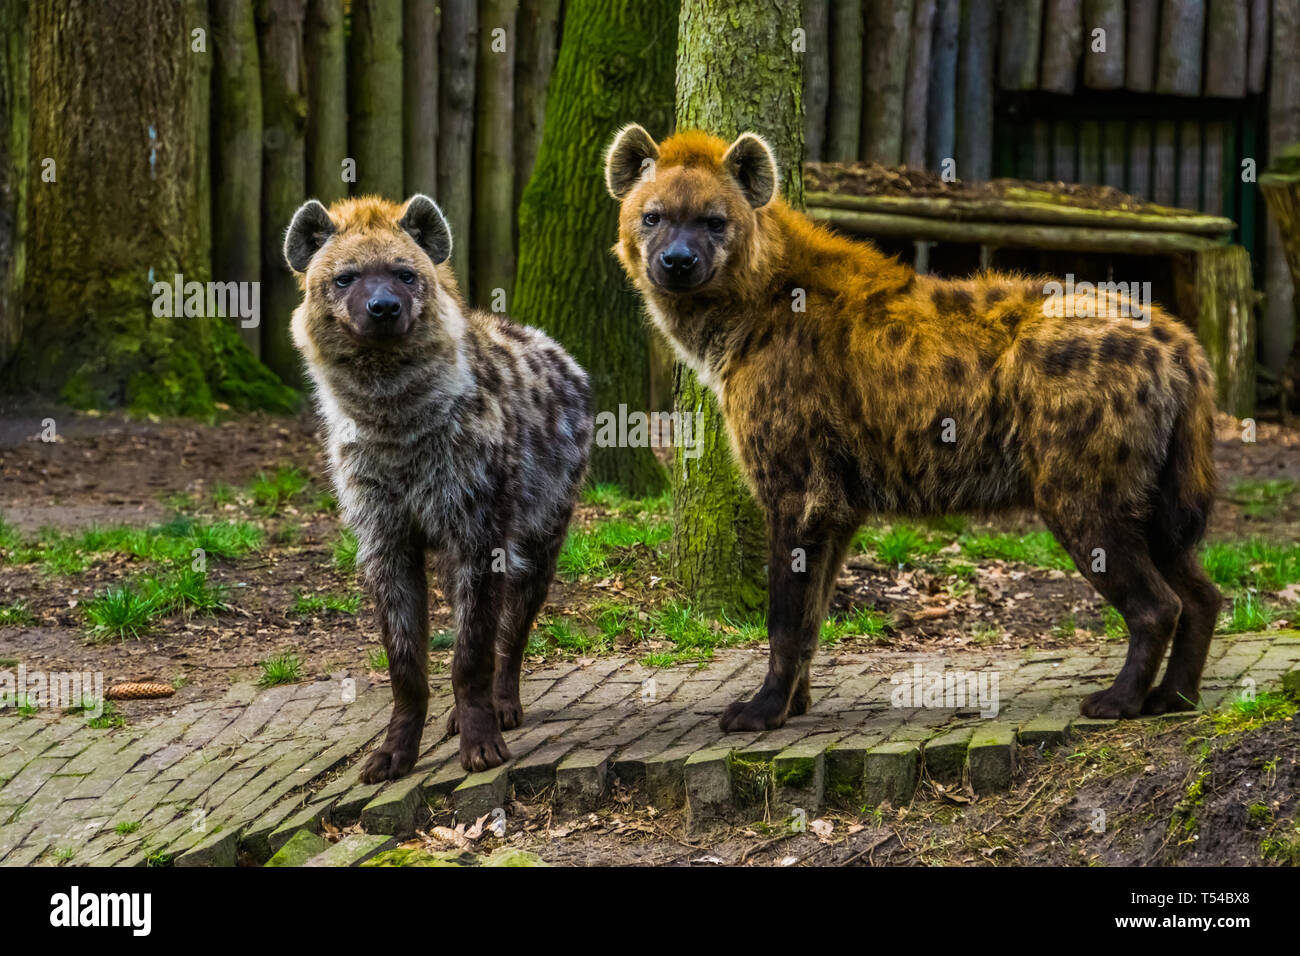 couple of spotted hyenas standing next to each other, wild carnivorous mammals from the desert of Africa Stock Photo